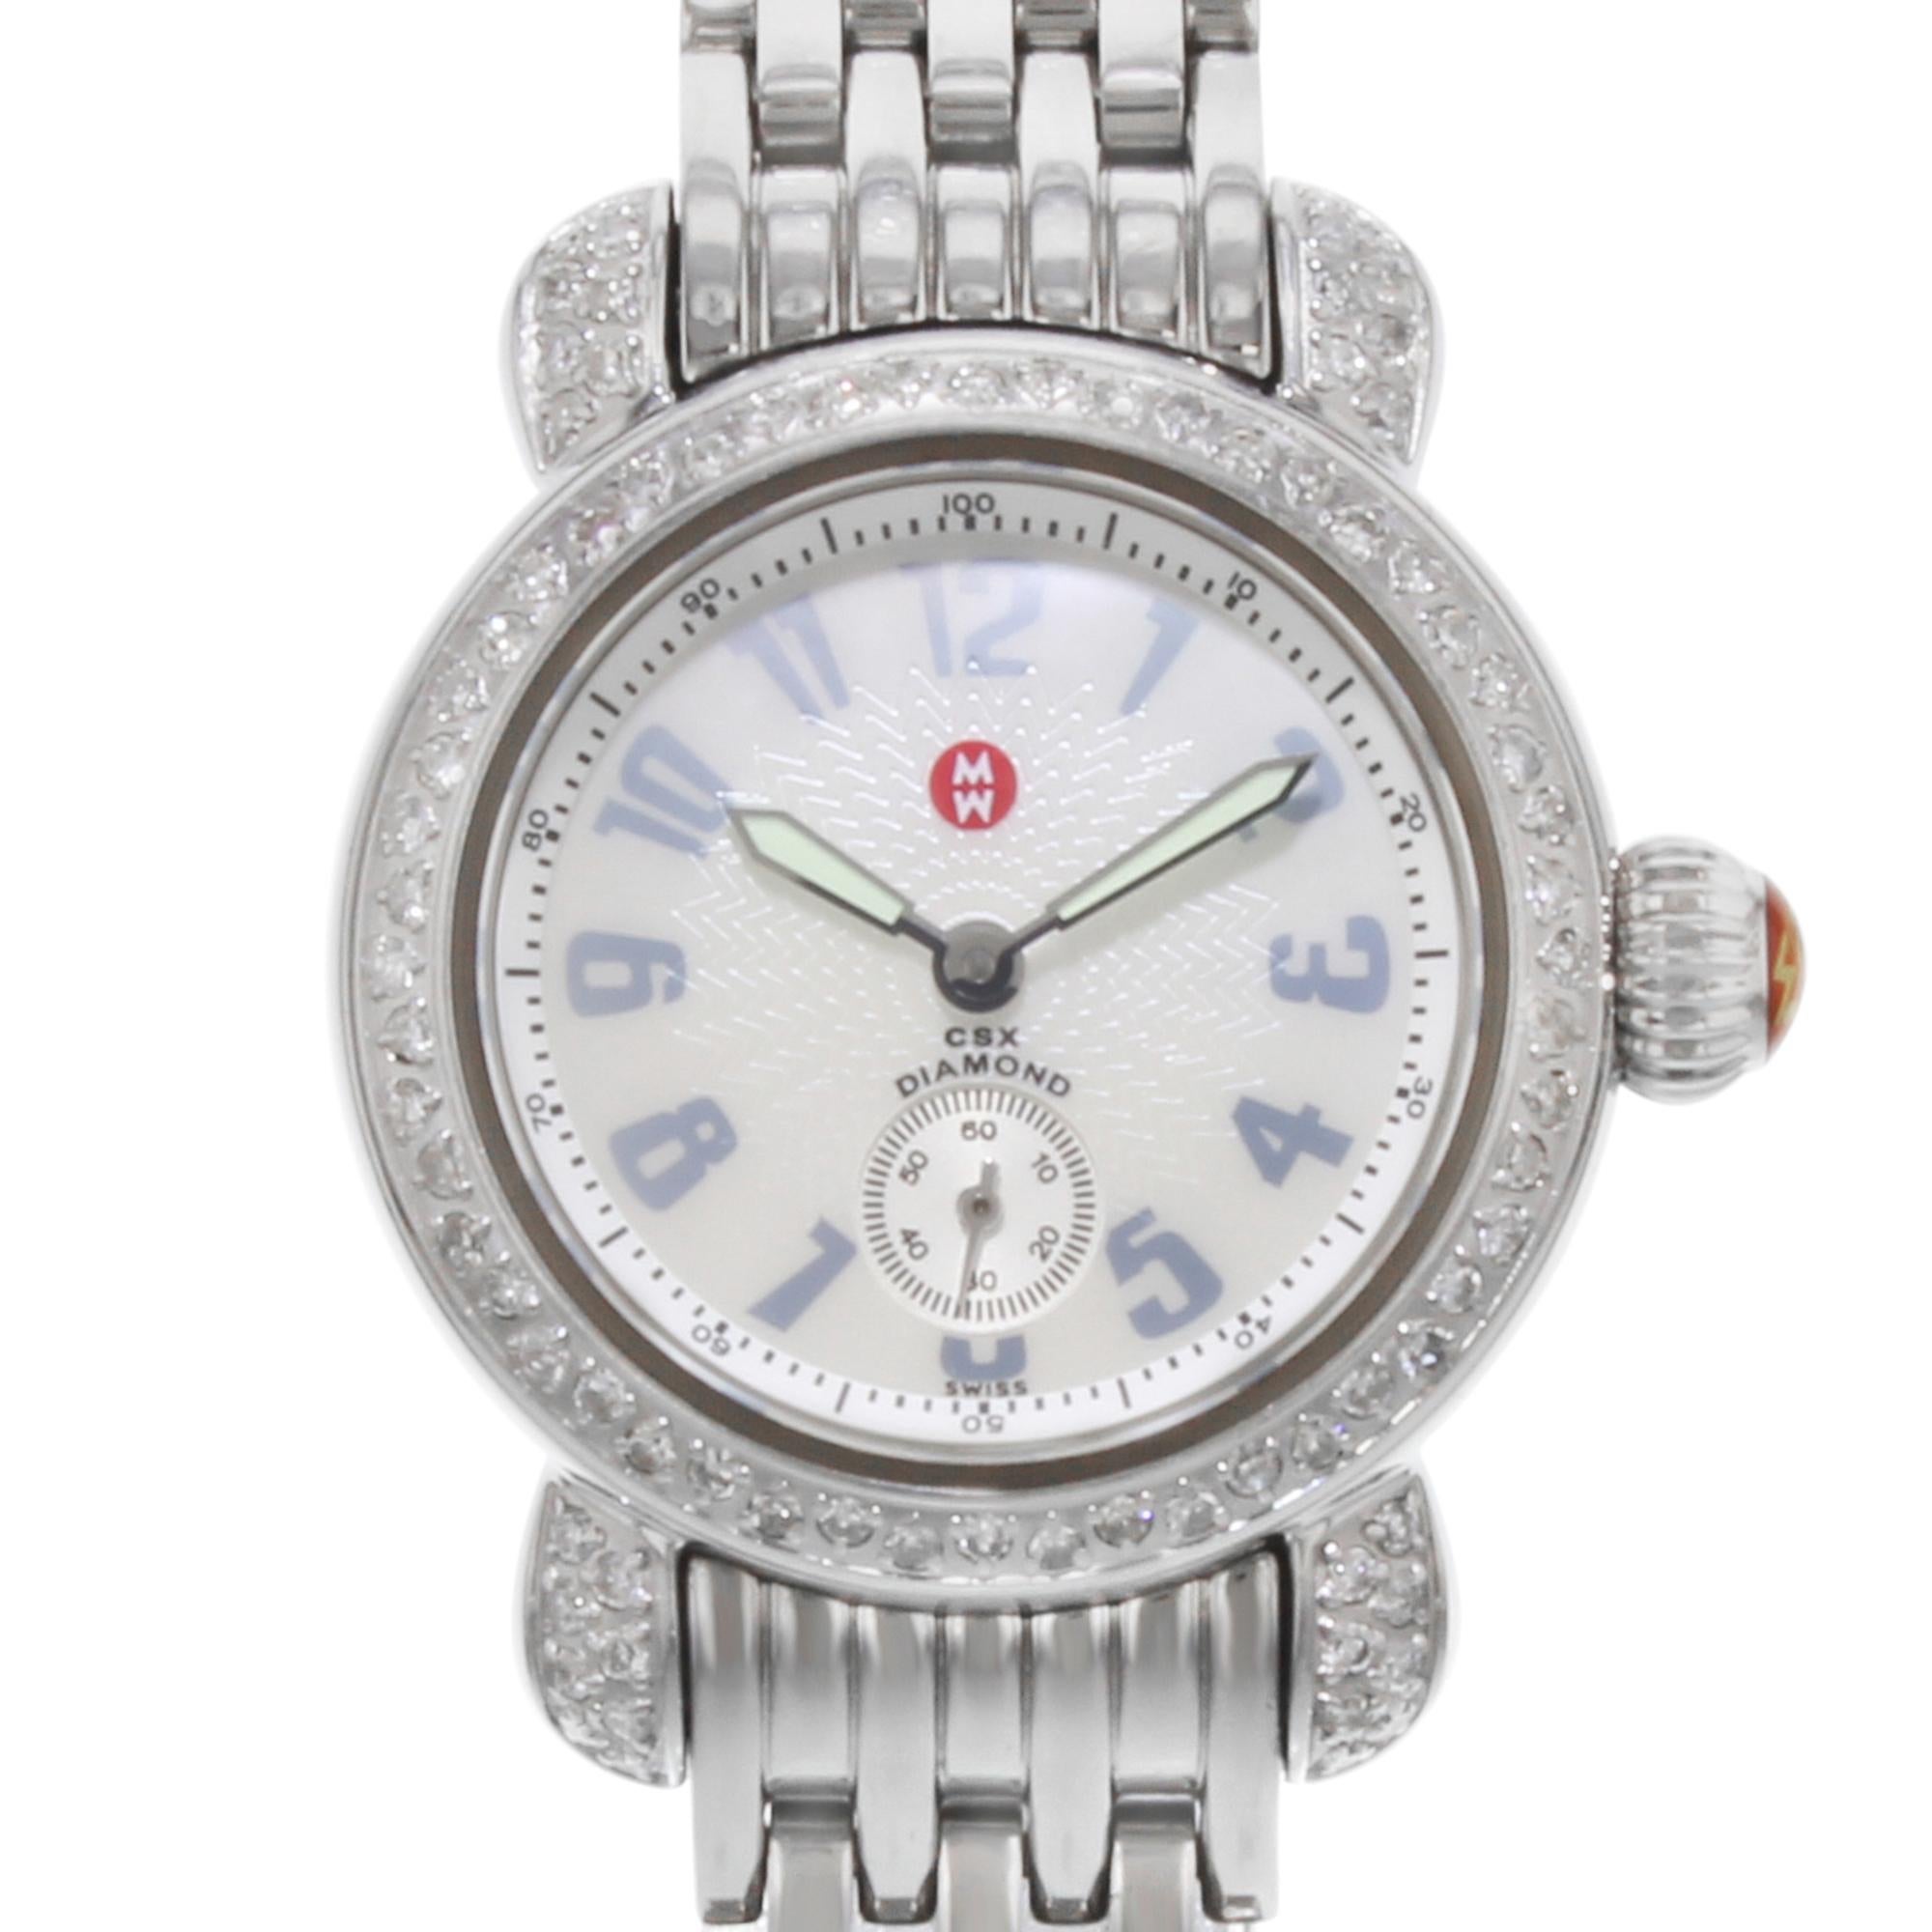 This pre-owned Michele CSX MW03A01 is a beautiful Ladies timepiece that is powered by a quartz movement which is cased in a stainless steel case. It has a round shape face, small seconds subdial dial and has hand arabic numerals style markers. It is